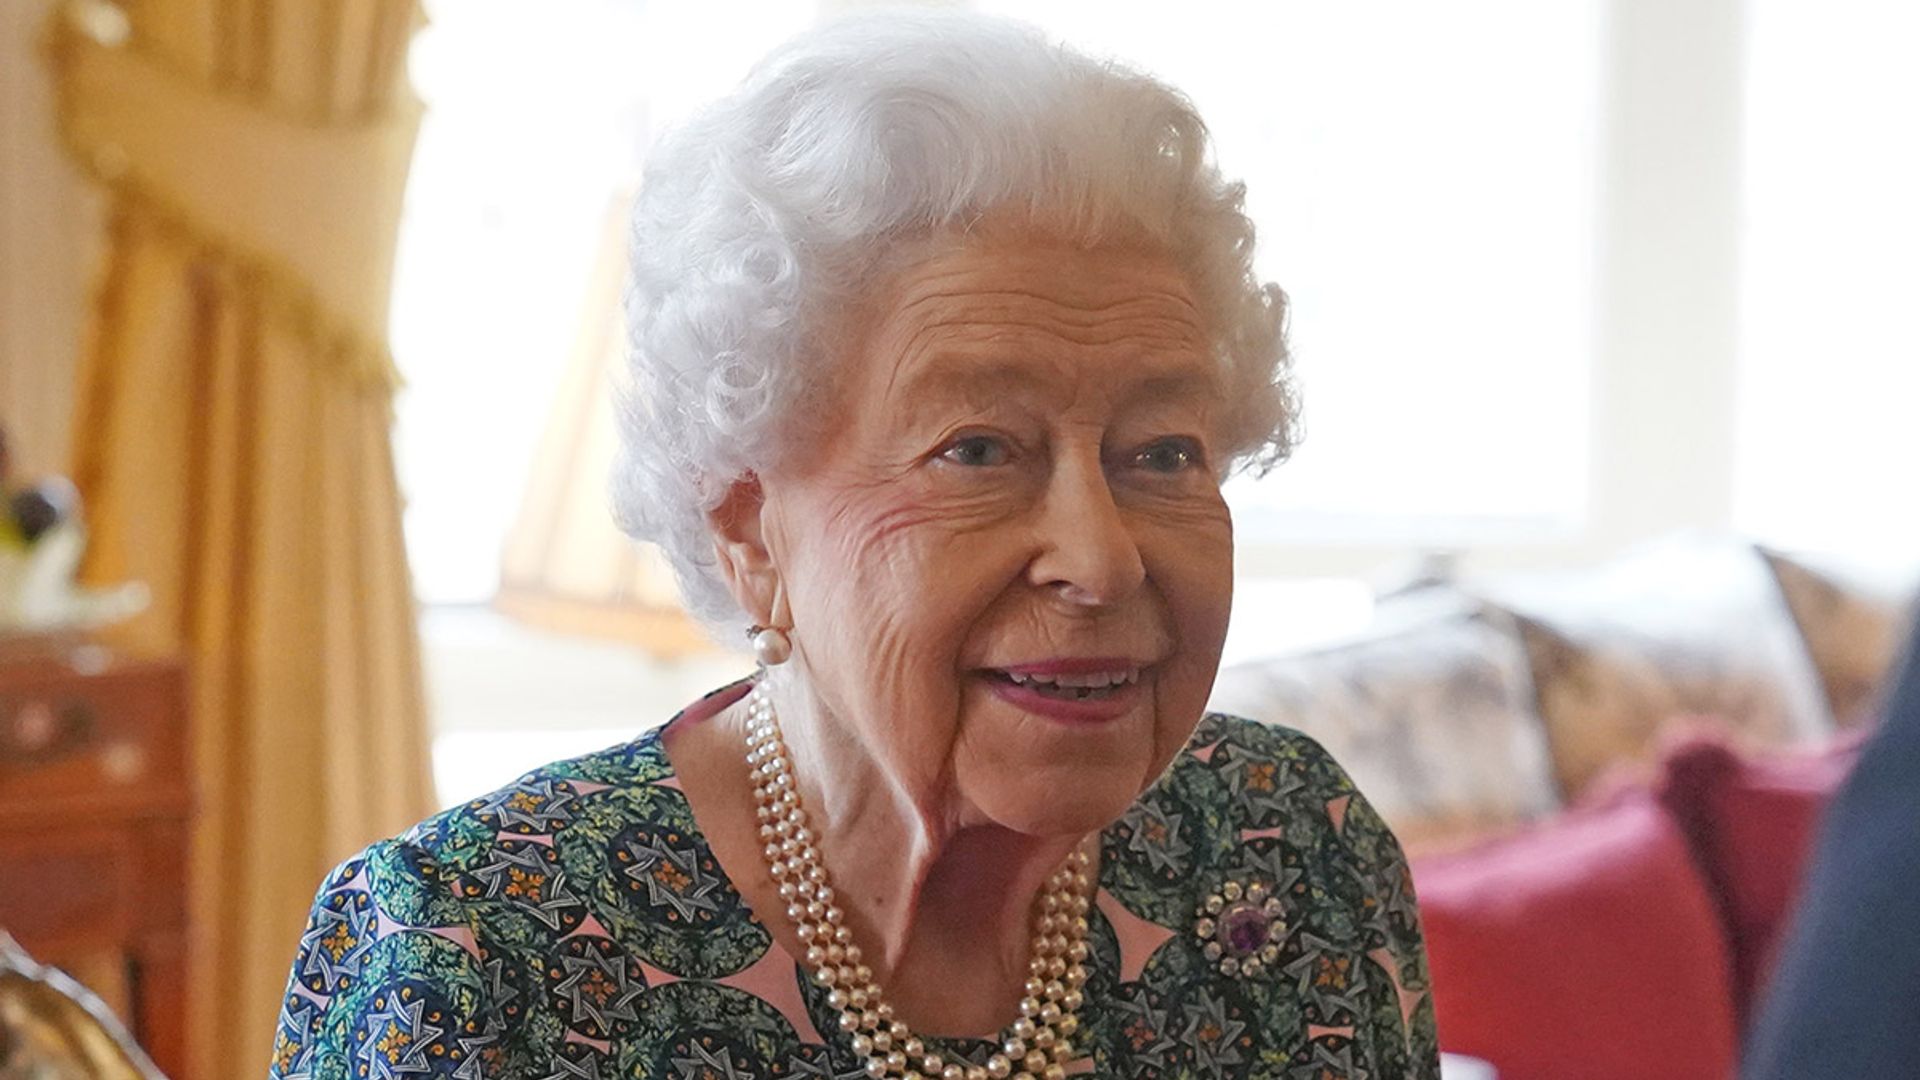 The Queen's secret £5 snack revealed – and you can buy it at Tesco!